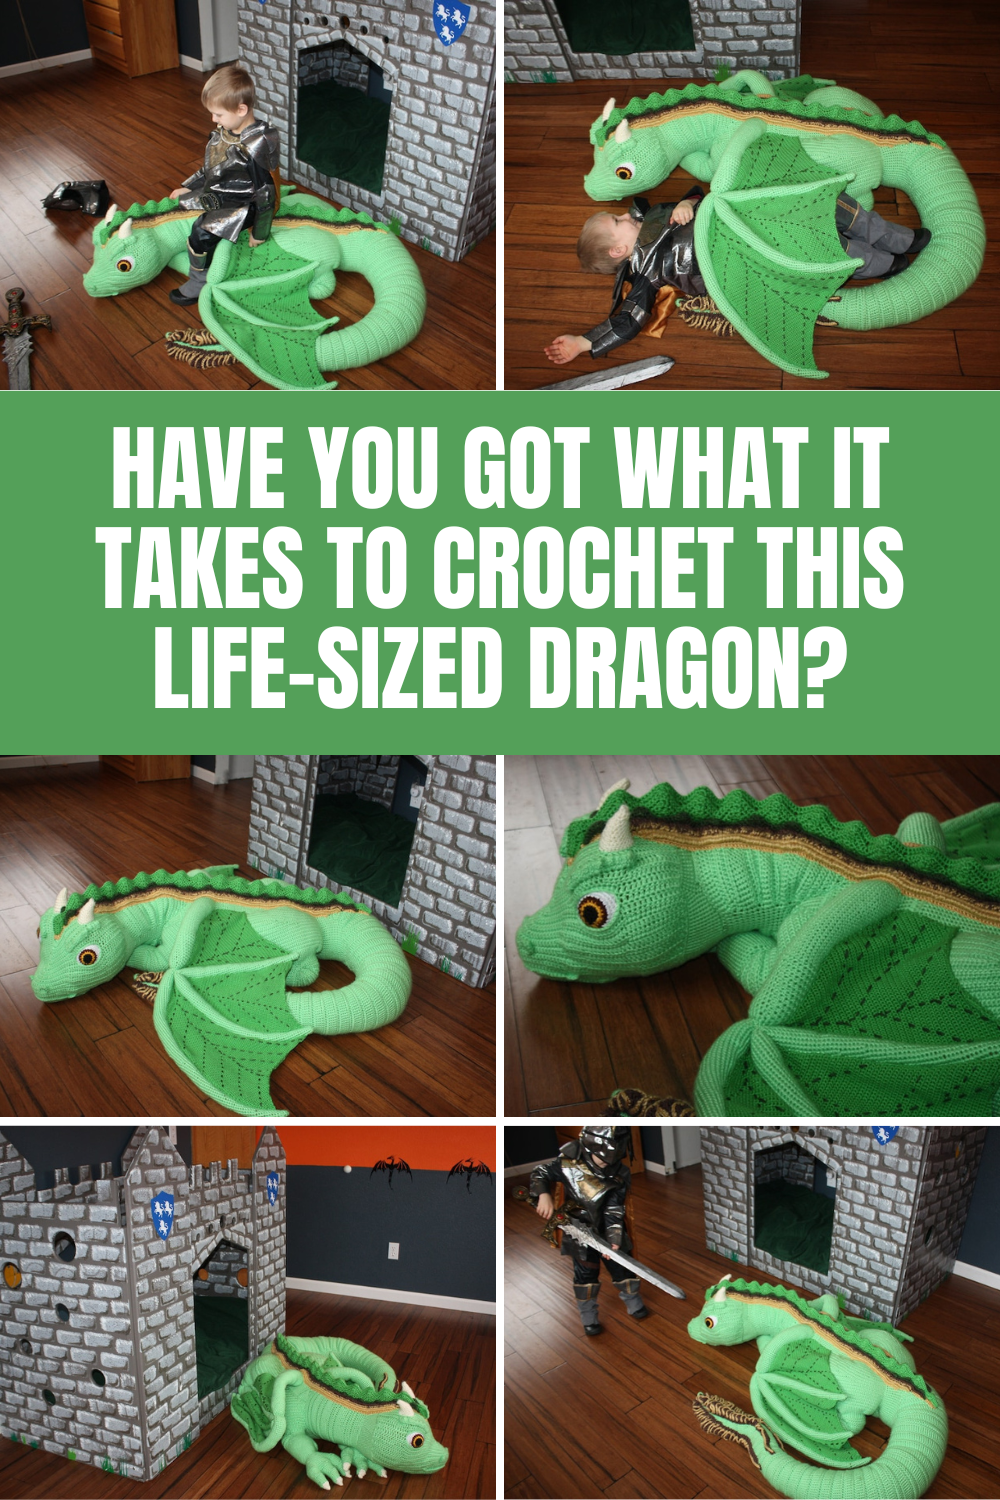 This is the baby dragon crochet pattern that puts all others in the shade! He's life sized and your kids will go crazy over him!